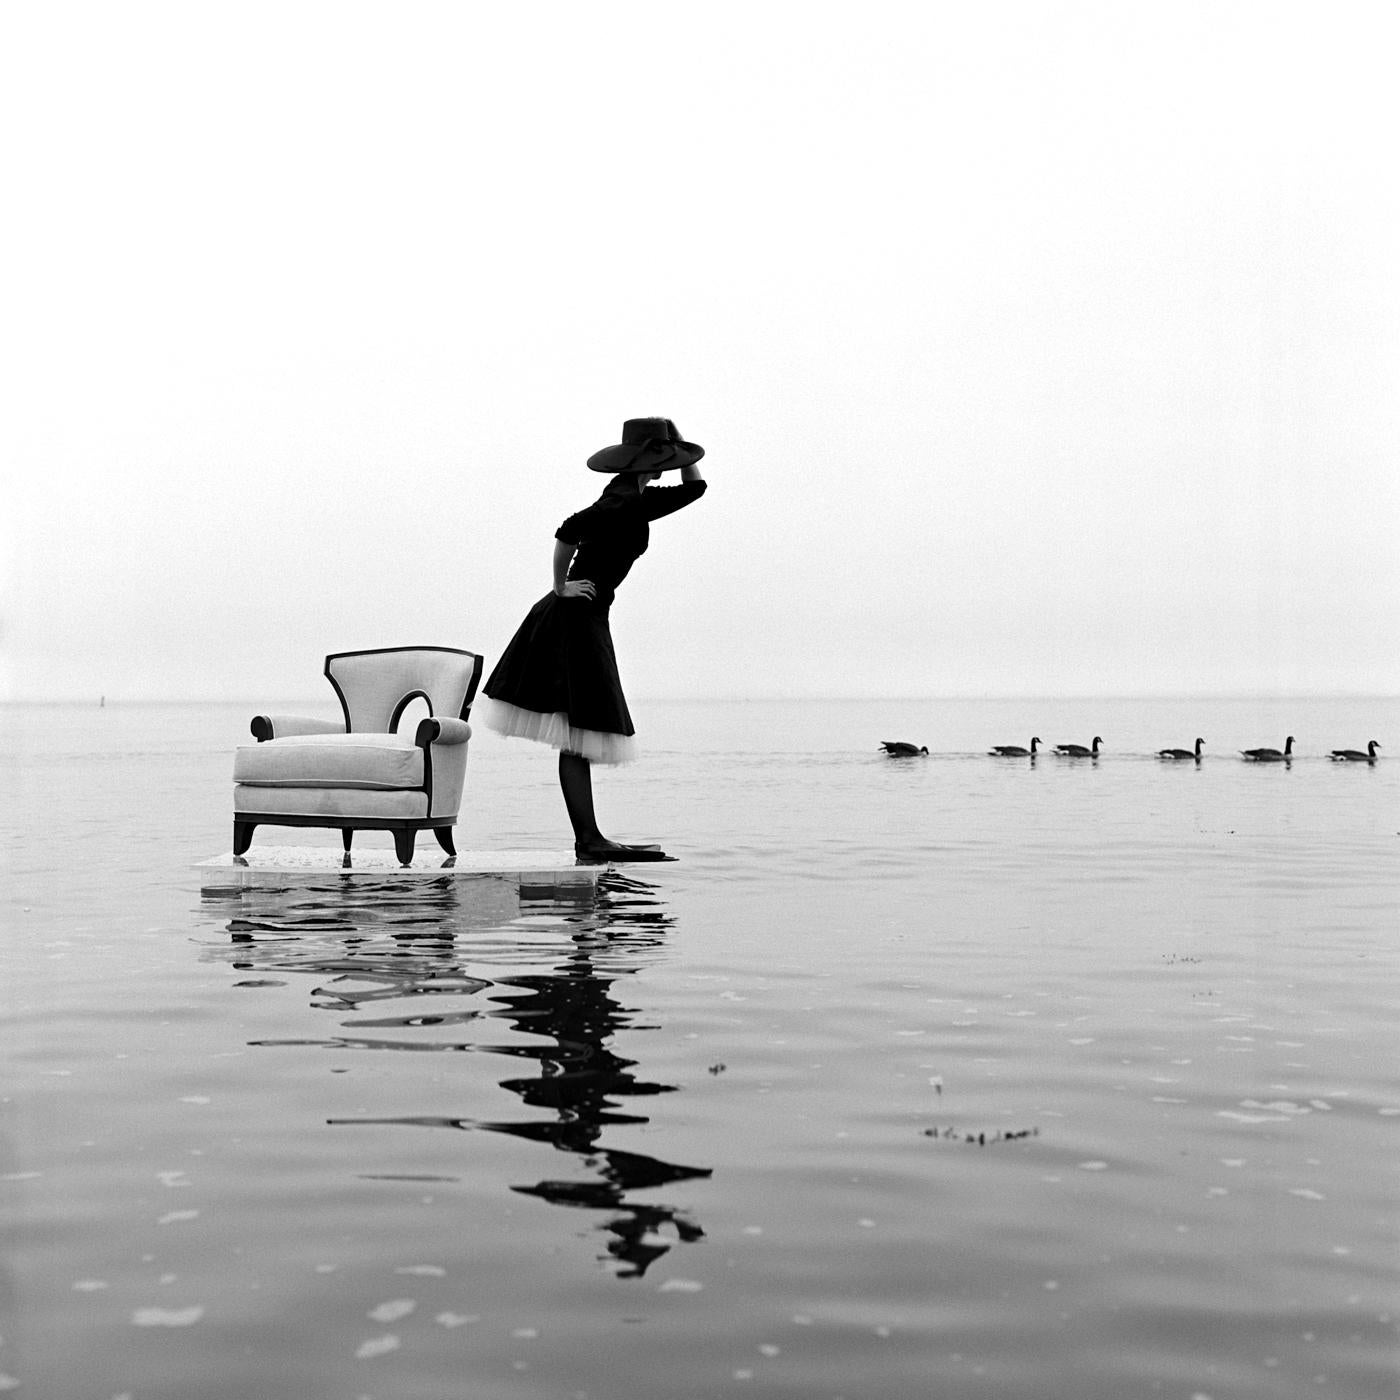 Rodney Smith Black and White Photograph - Zoe on Water With Ducks, Sherwood Island, Westport, CT - 45 x 45 inches